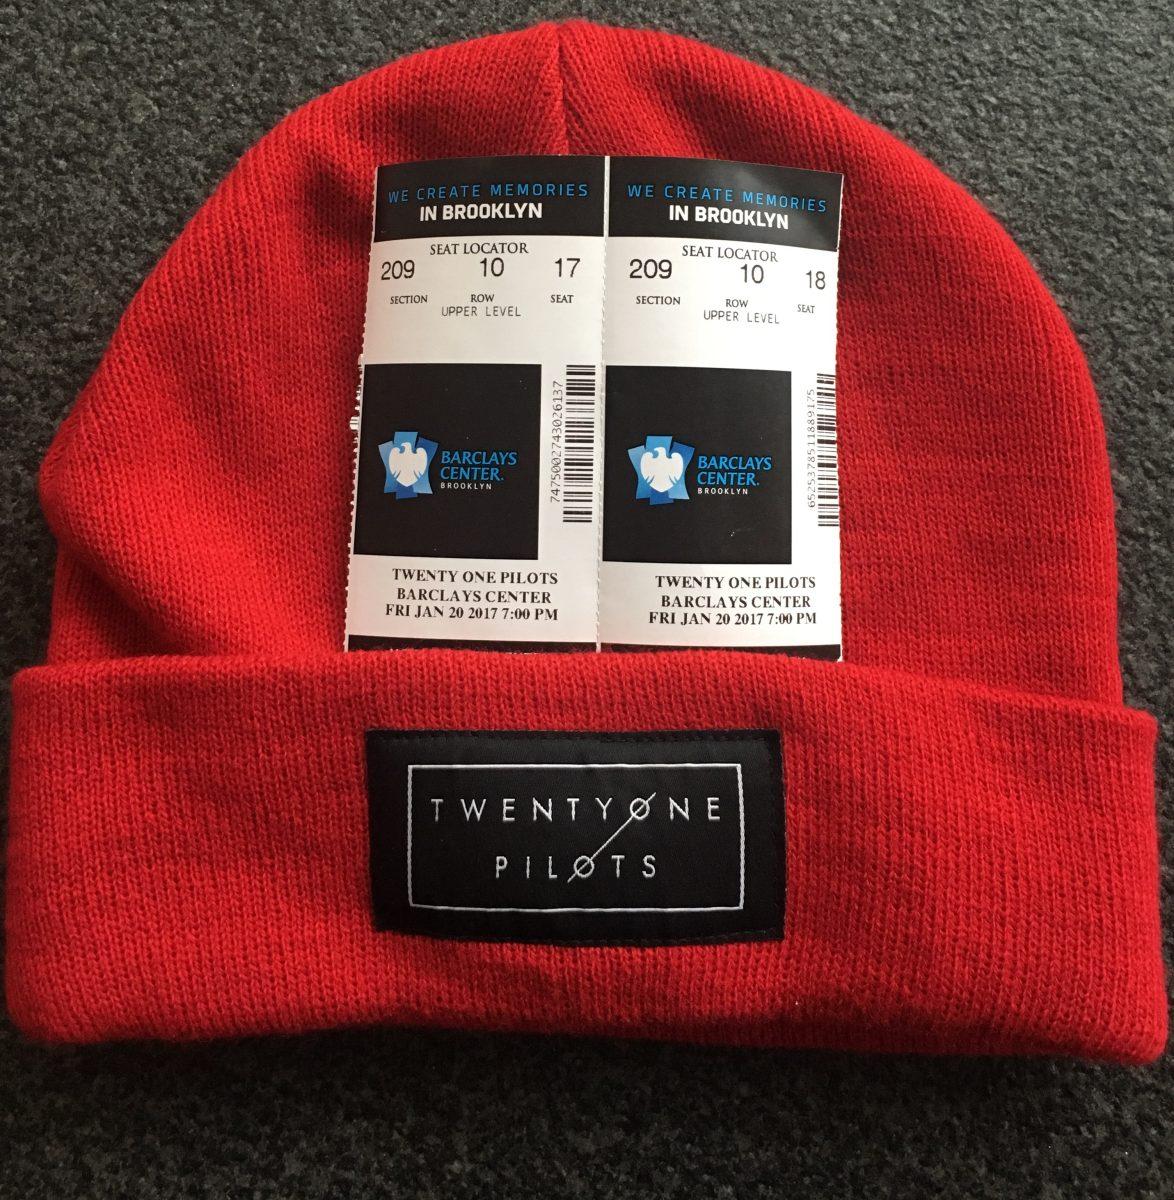 Fans sported red beanies at the recent Twenty One Pilots concert in Brooklyn (Photo by Rafa Dhelomme 20).
